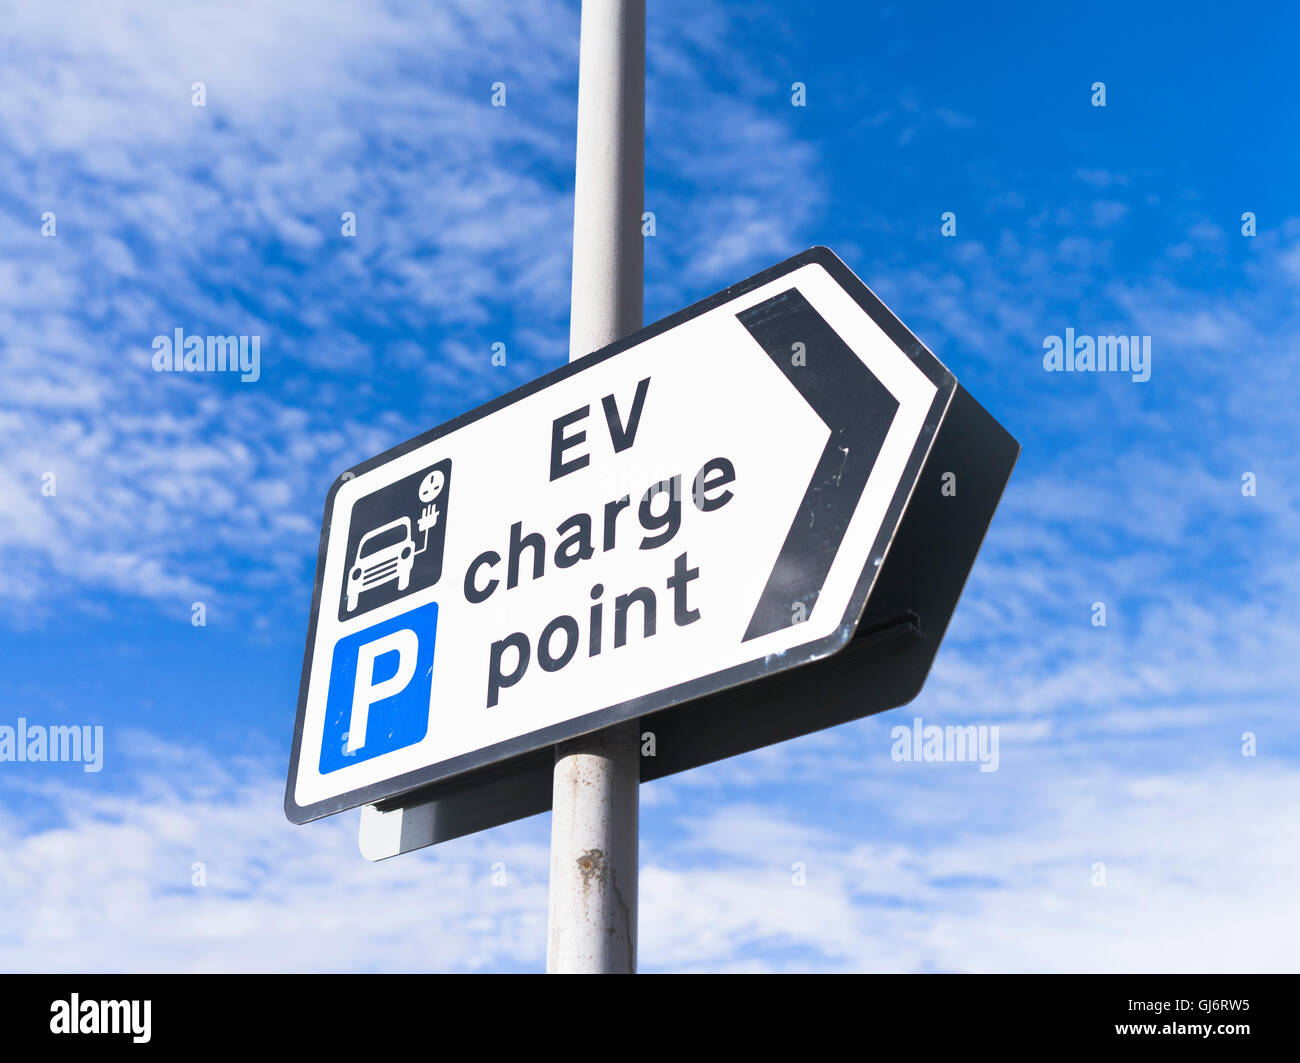 dh Electric ENVIRONMENT UK electric vehicle ev charge point sign car charging point station parking cars Stock Photo